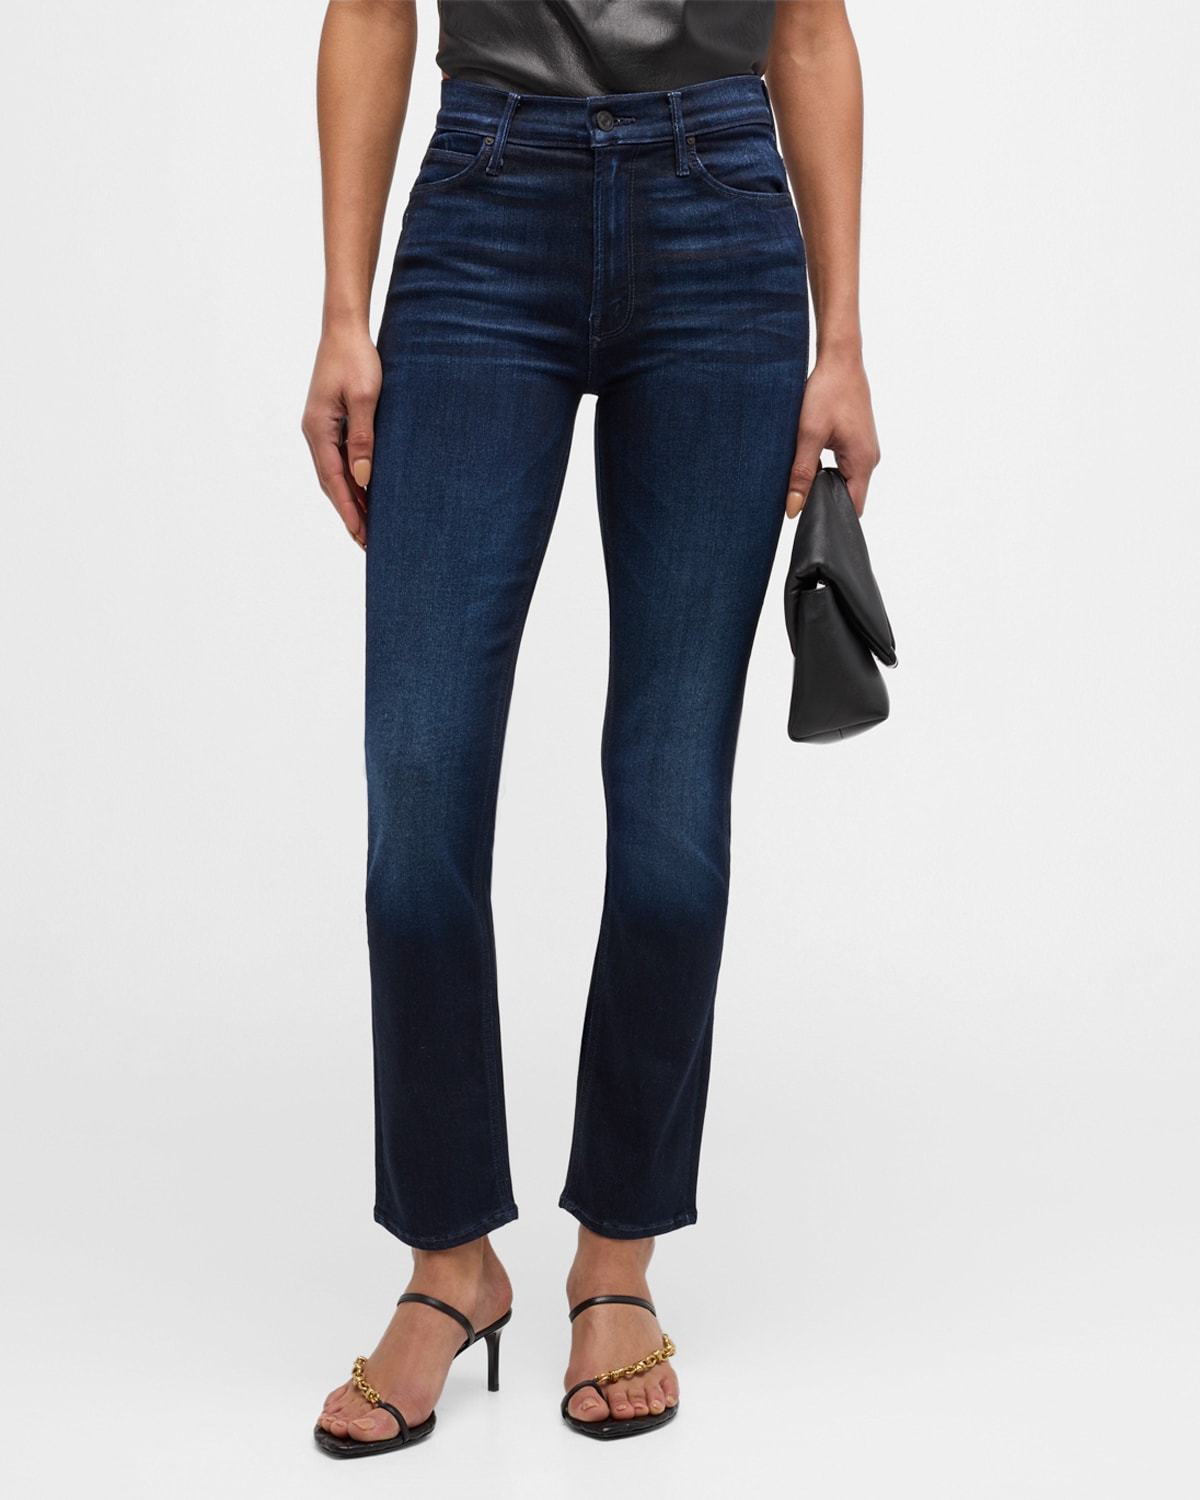 The Mid-Rise Dazzler Ankle Jeans